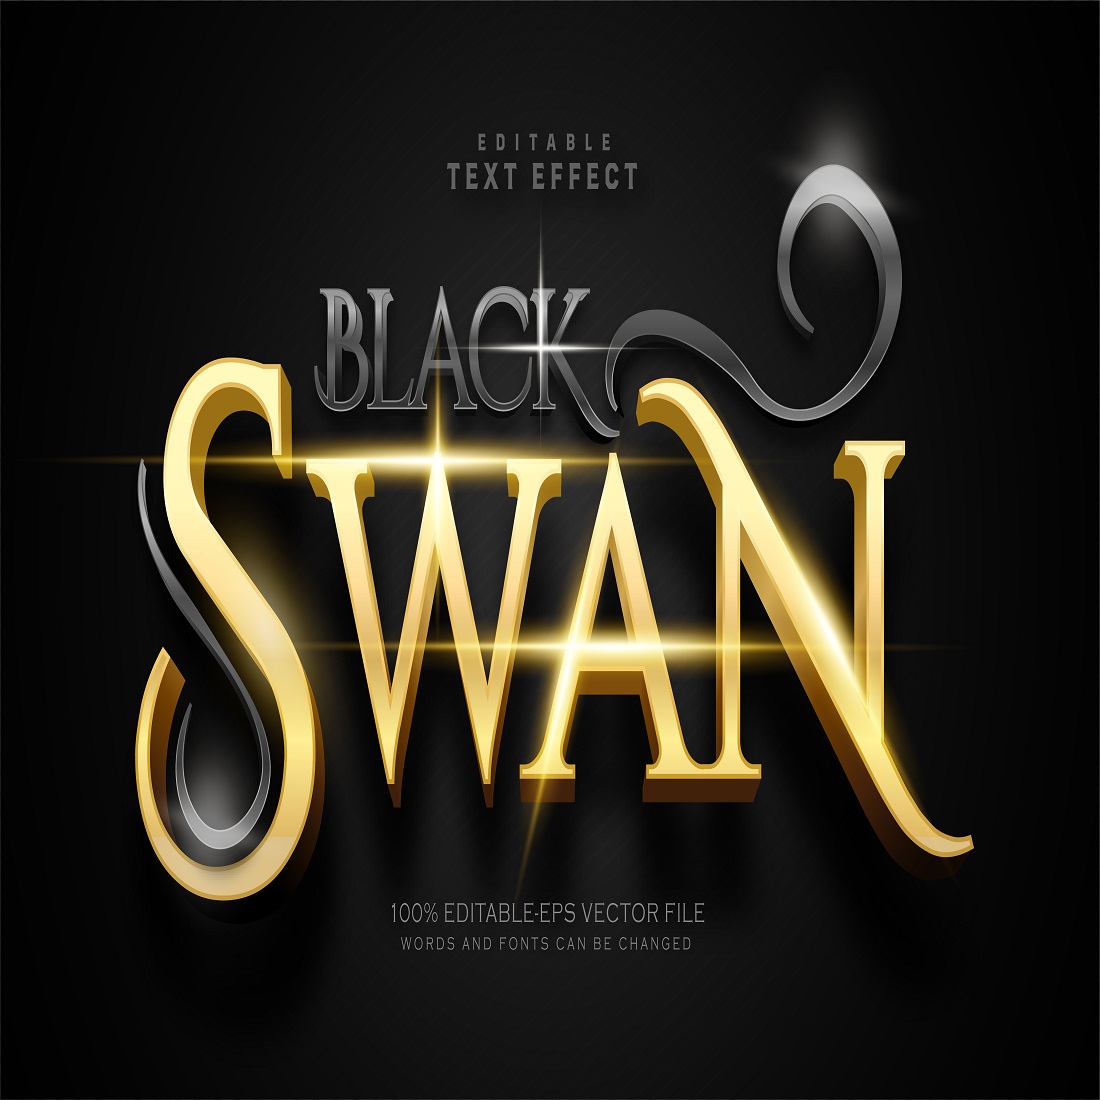 Black swan text effect preview image.